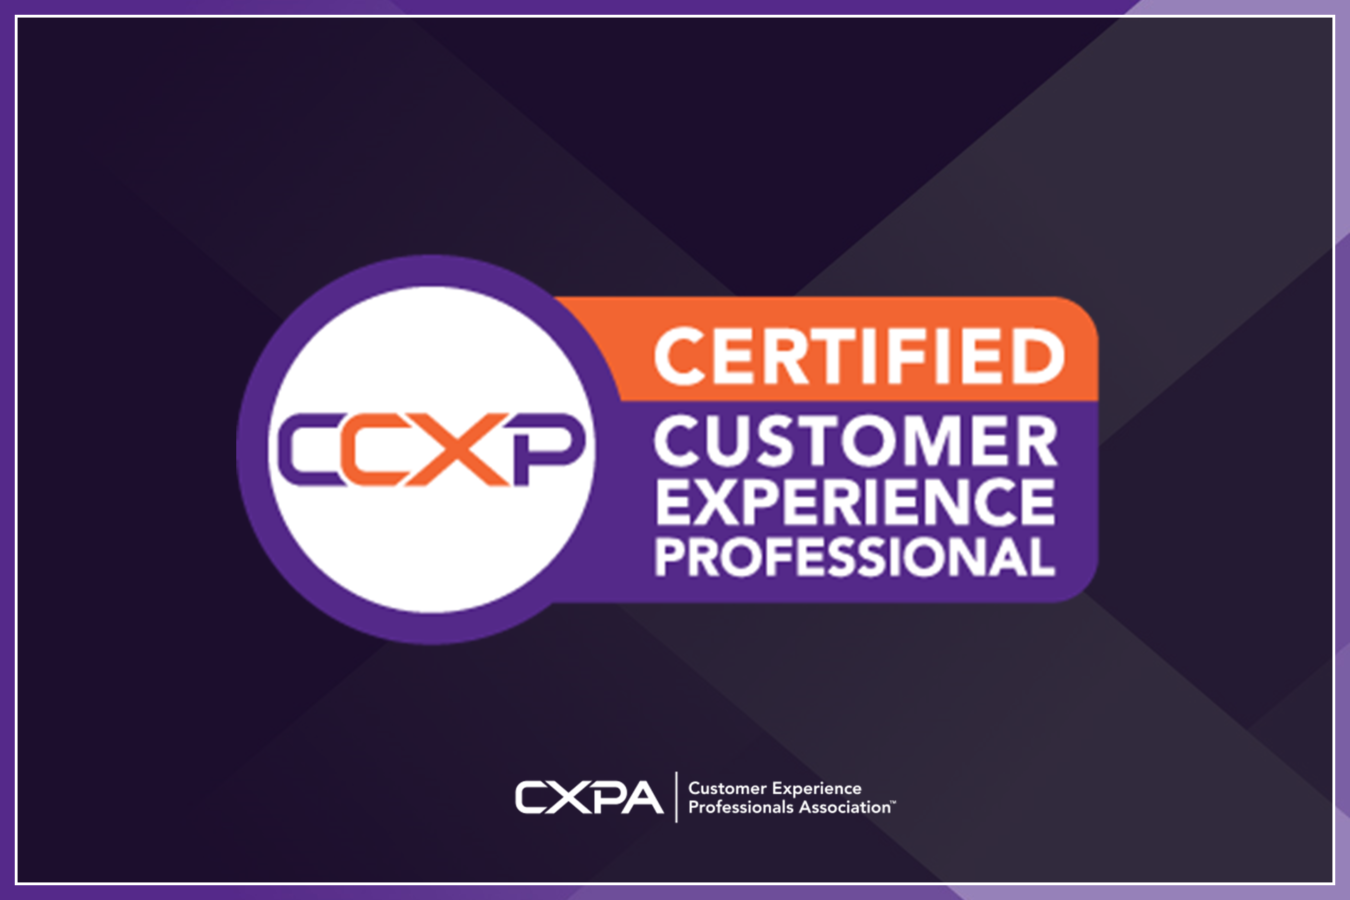 The banner shows the logo of the organization that issues the certification explained in the article My CCXP journey.